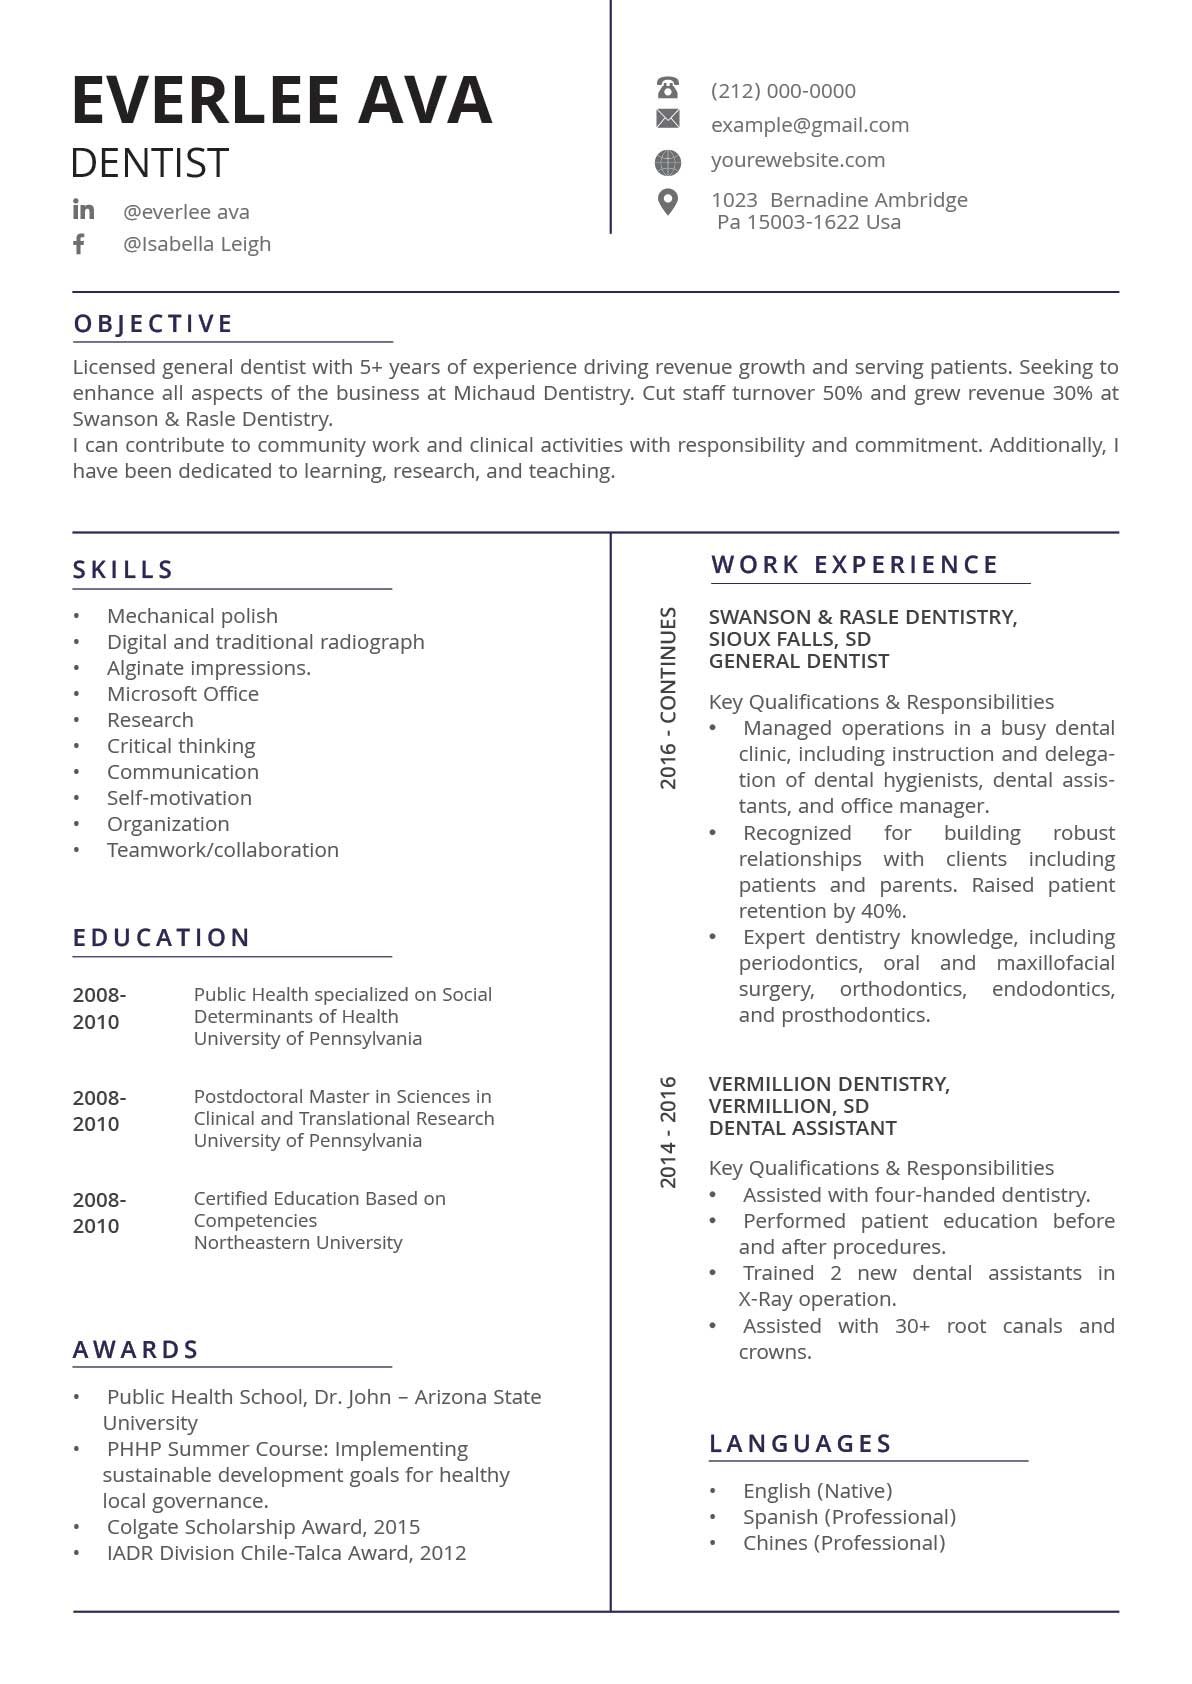 Professional resume for a dental assistant.